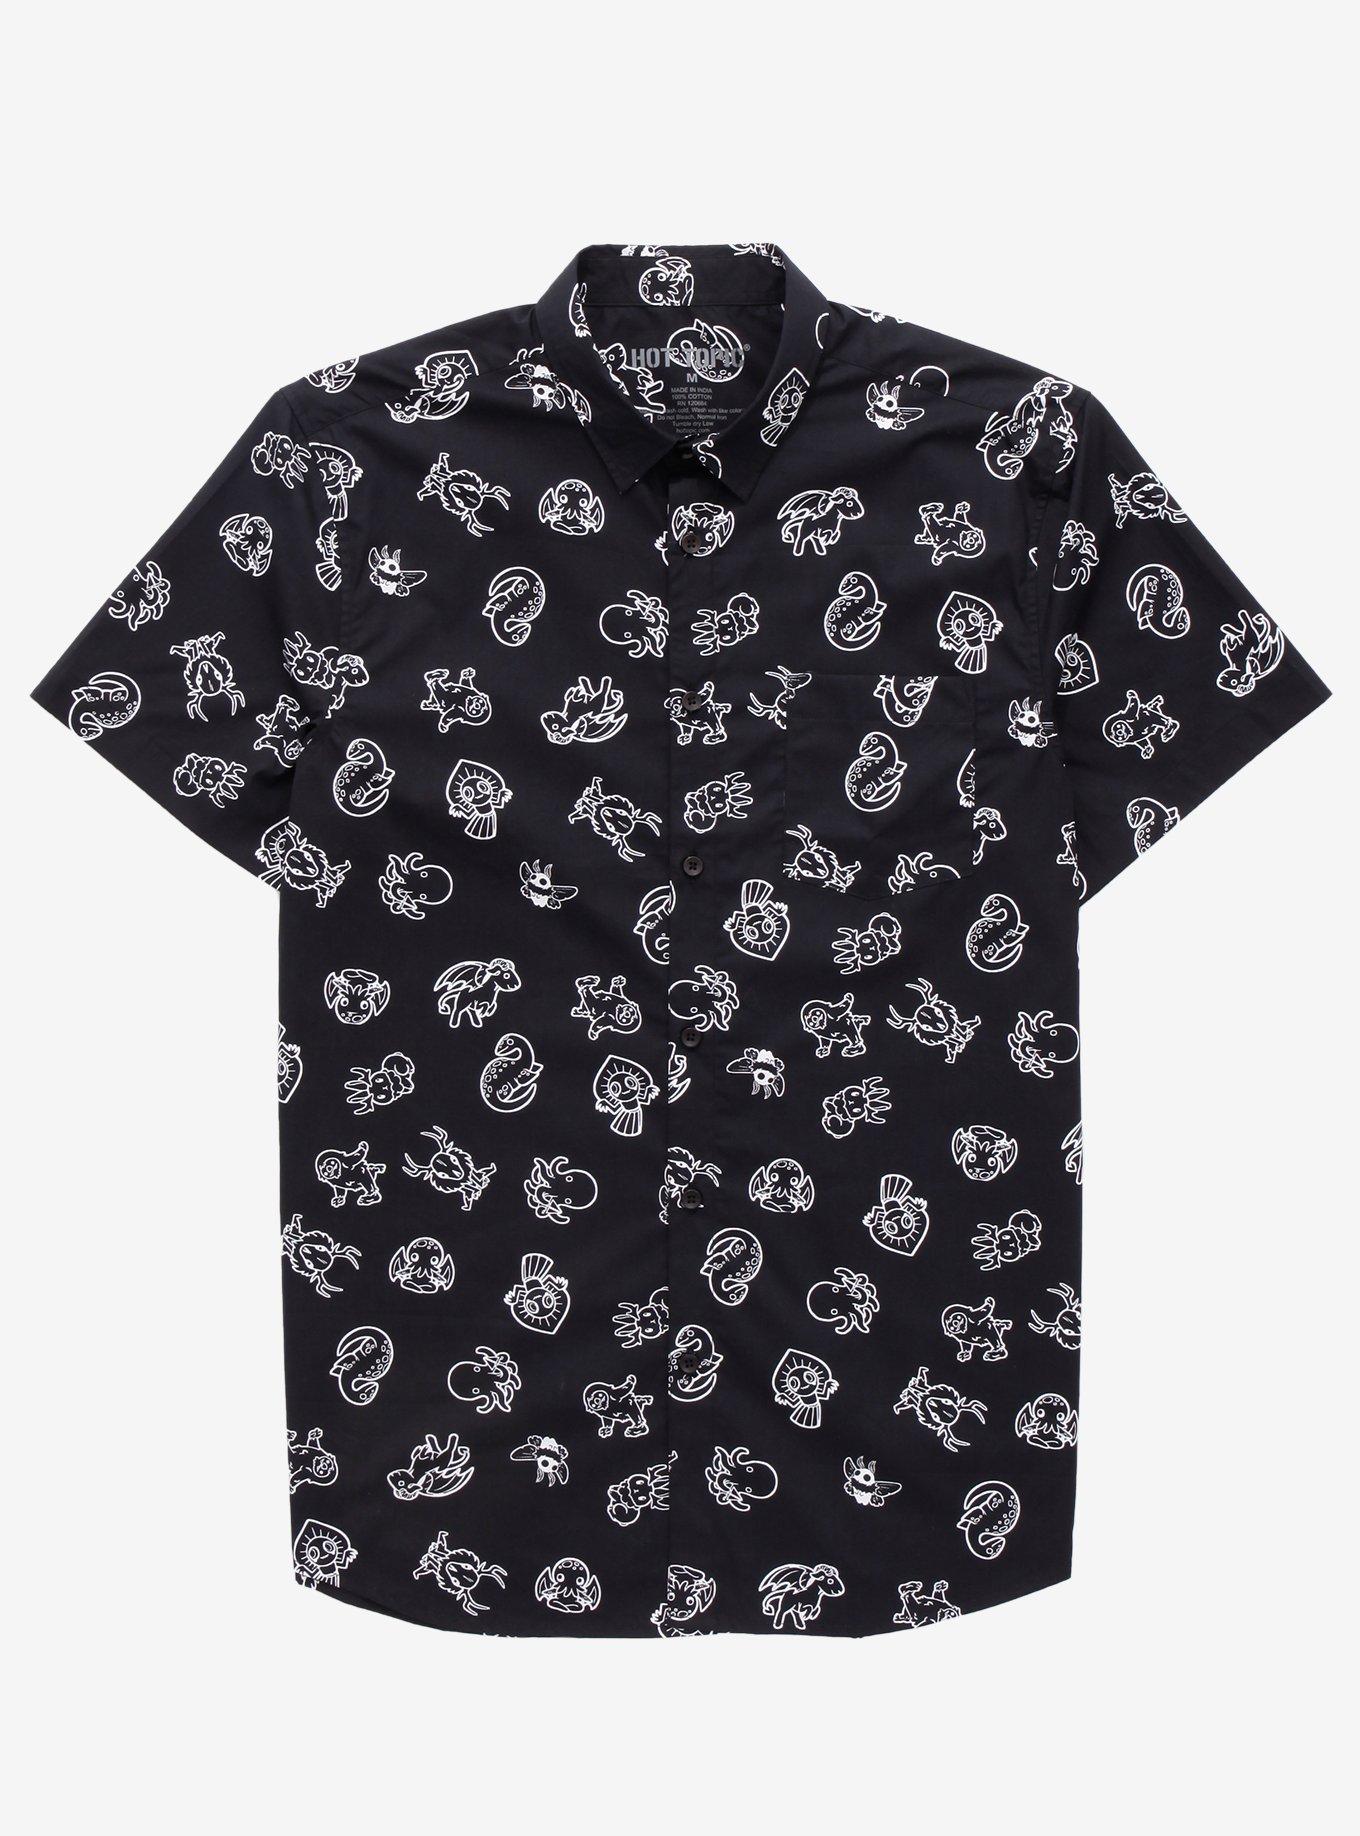 Black & White Cryptids Woven Button-Up, BLACK, hi-res